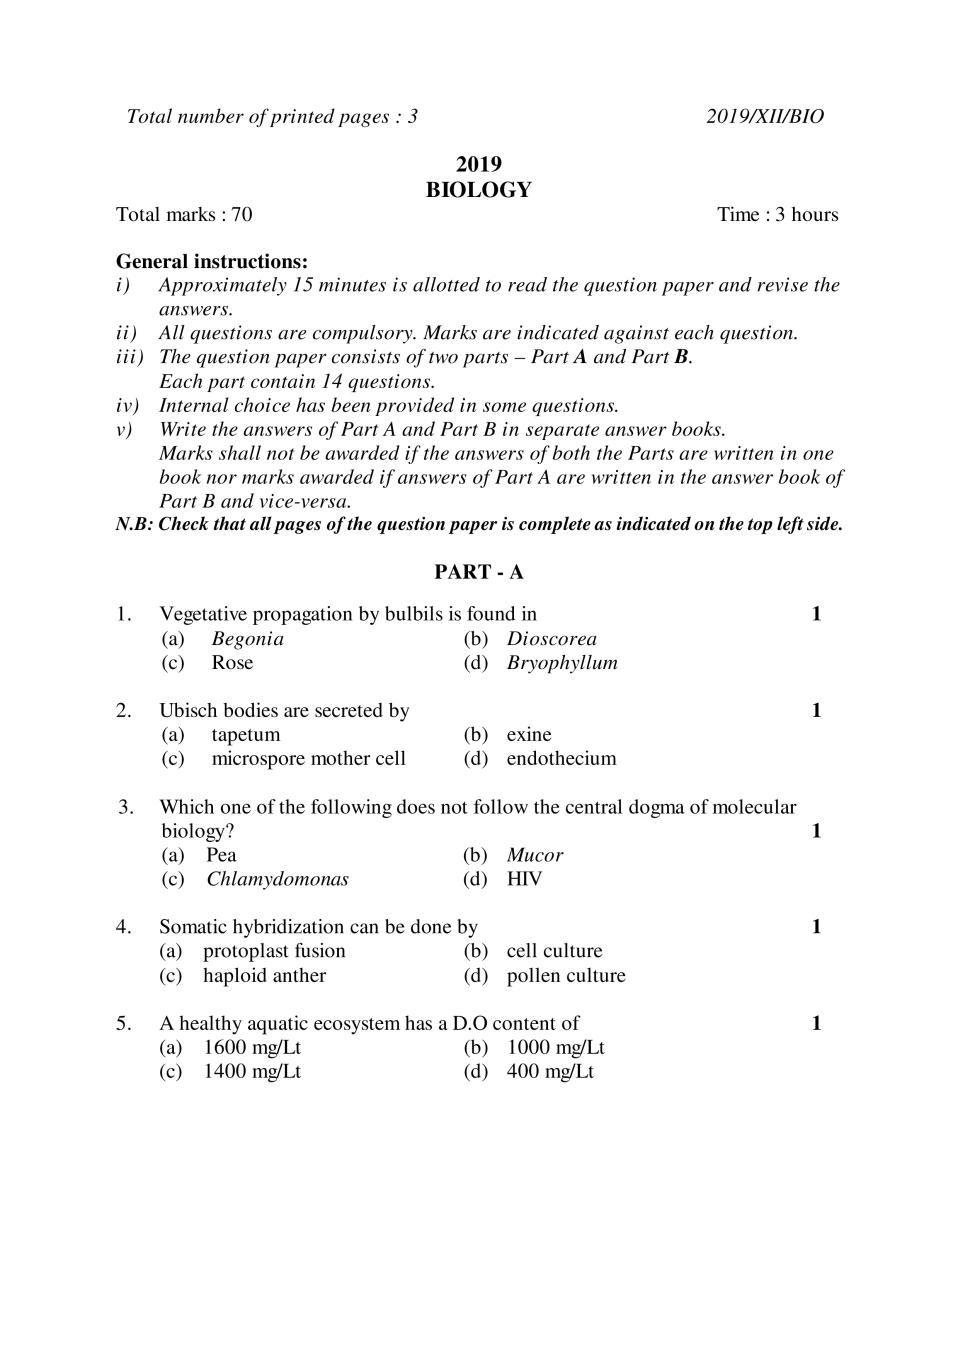 NBSE Class 12 Question Paper 2019 for Biology - Page 1